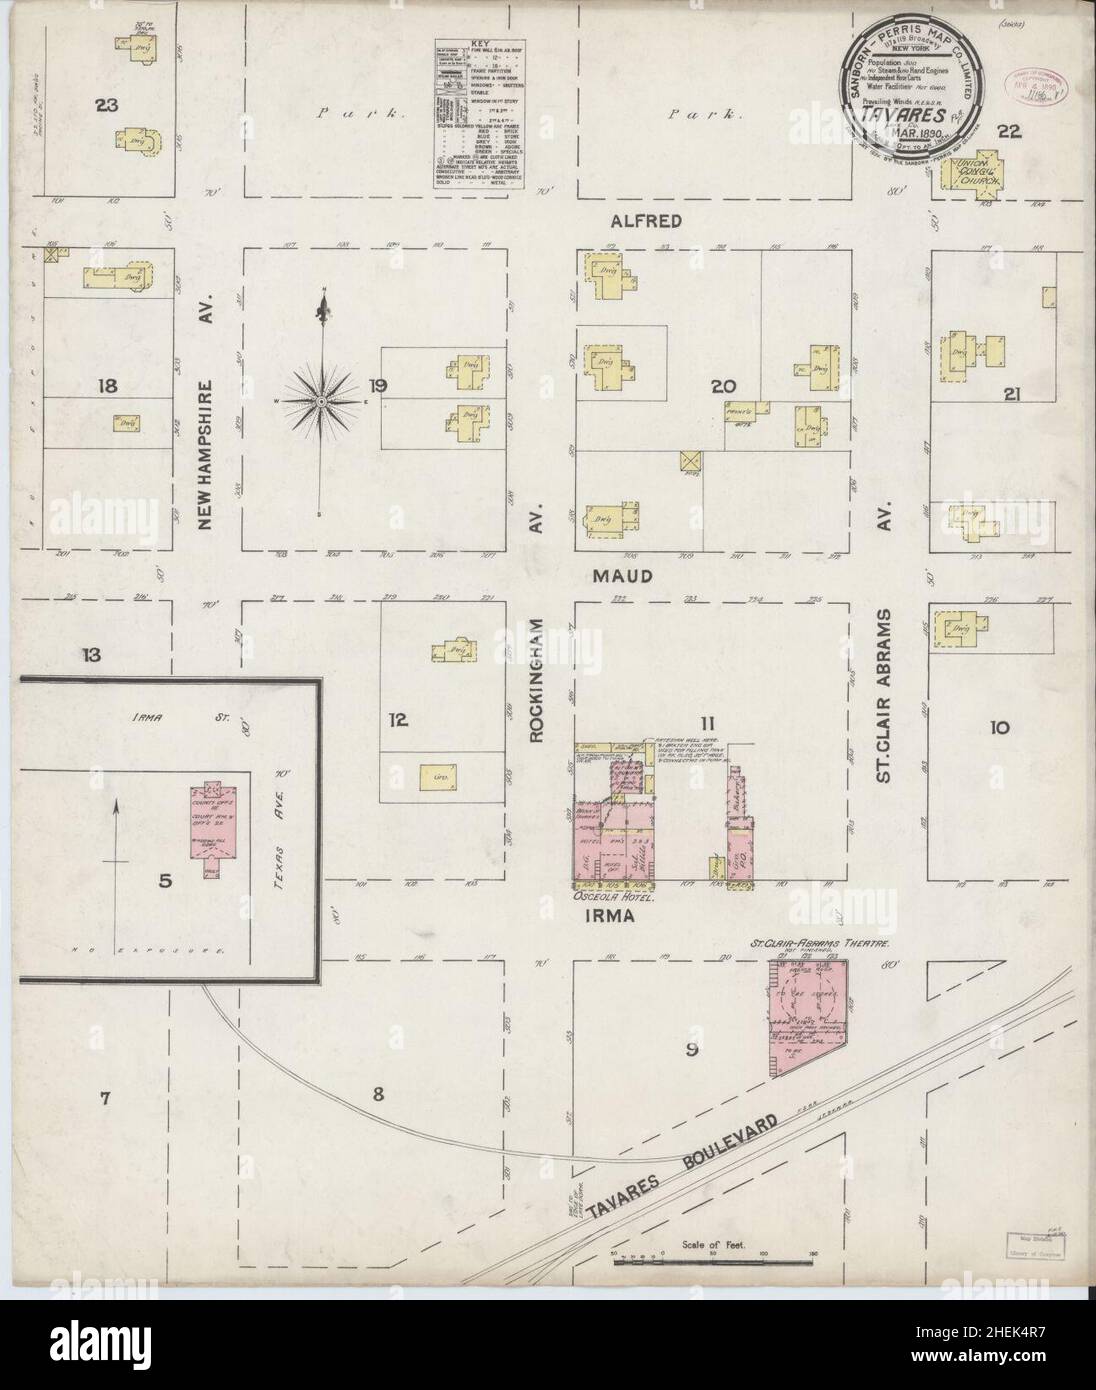 Sanborn Fire Insurance Map from Tavares, Lake County, Florida. Stock Photo